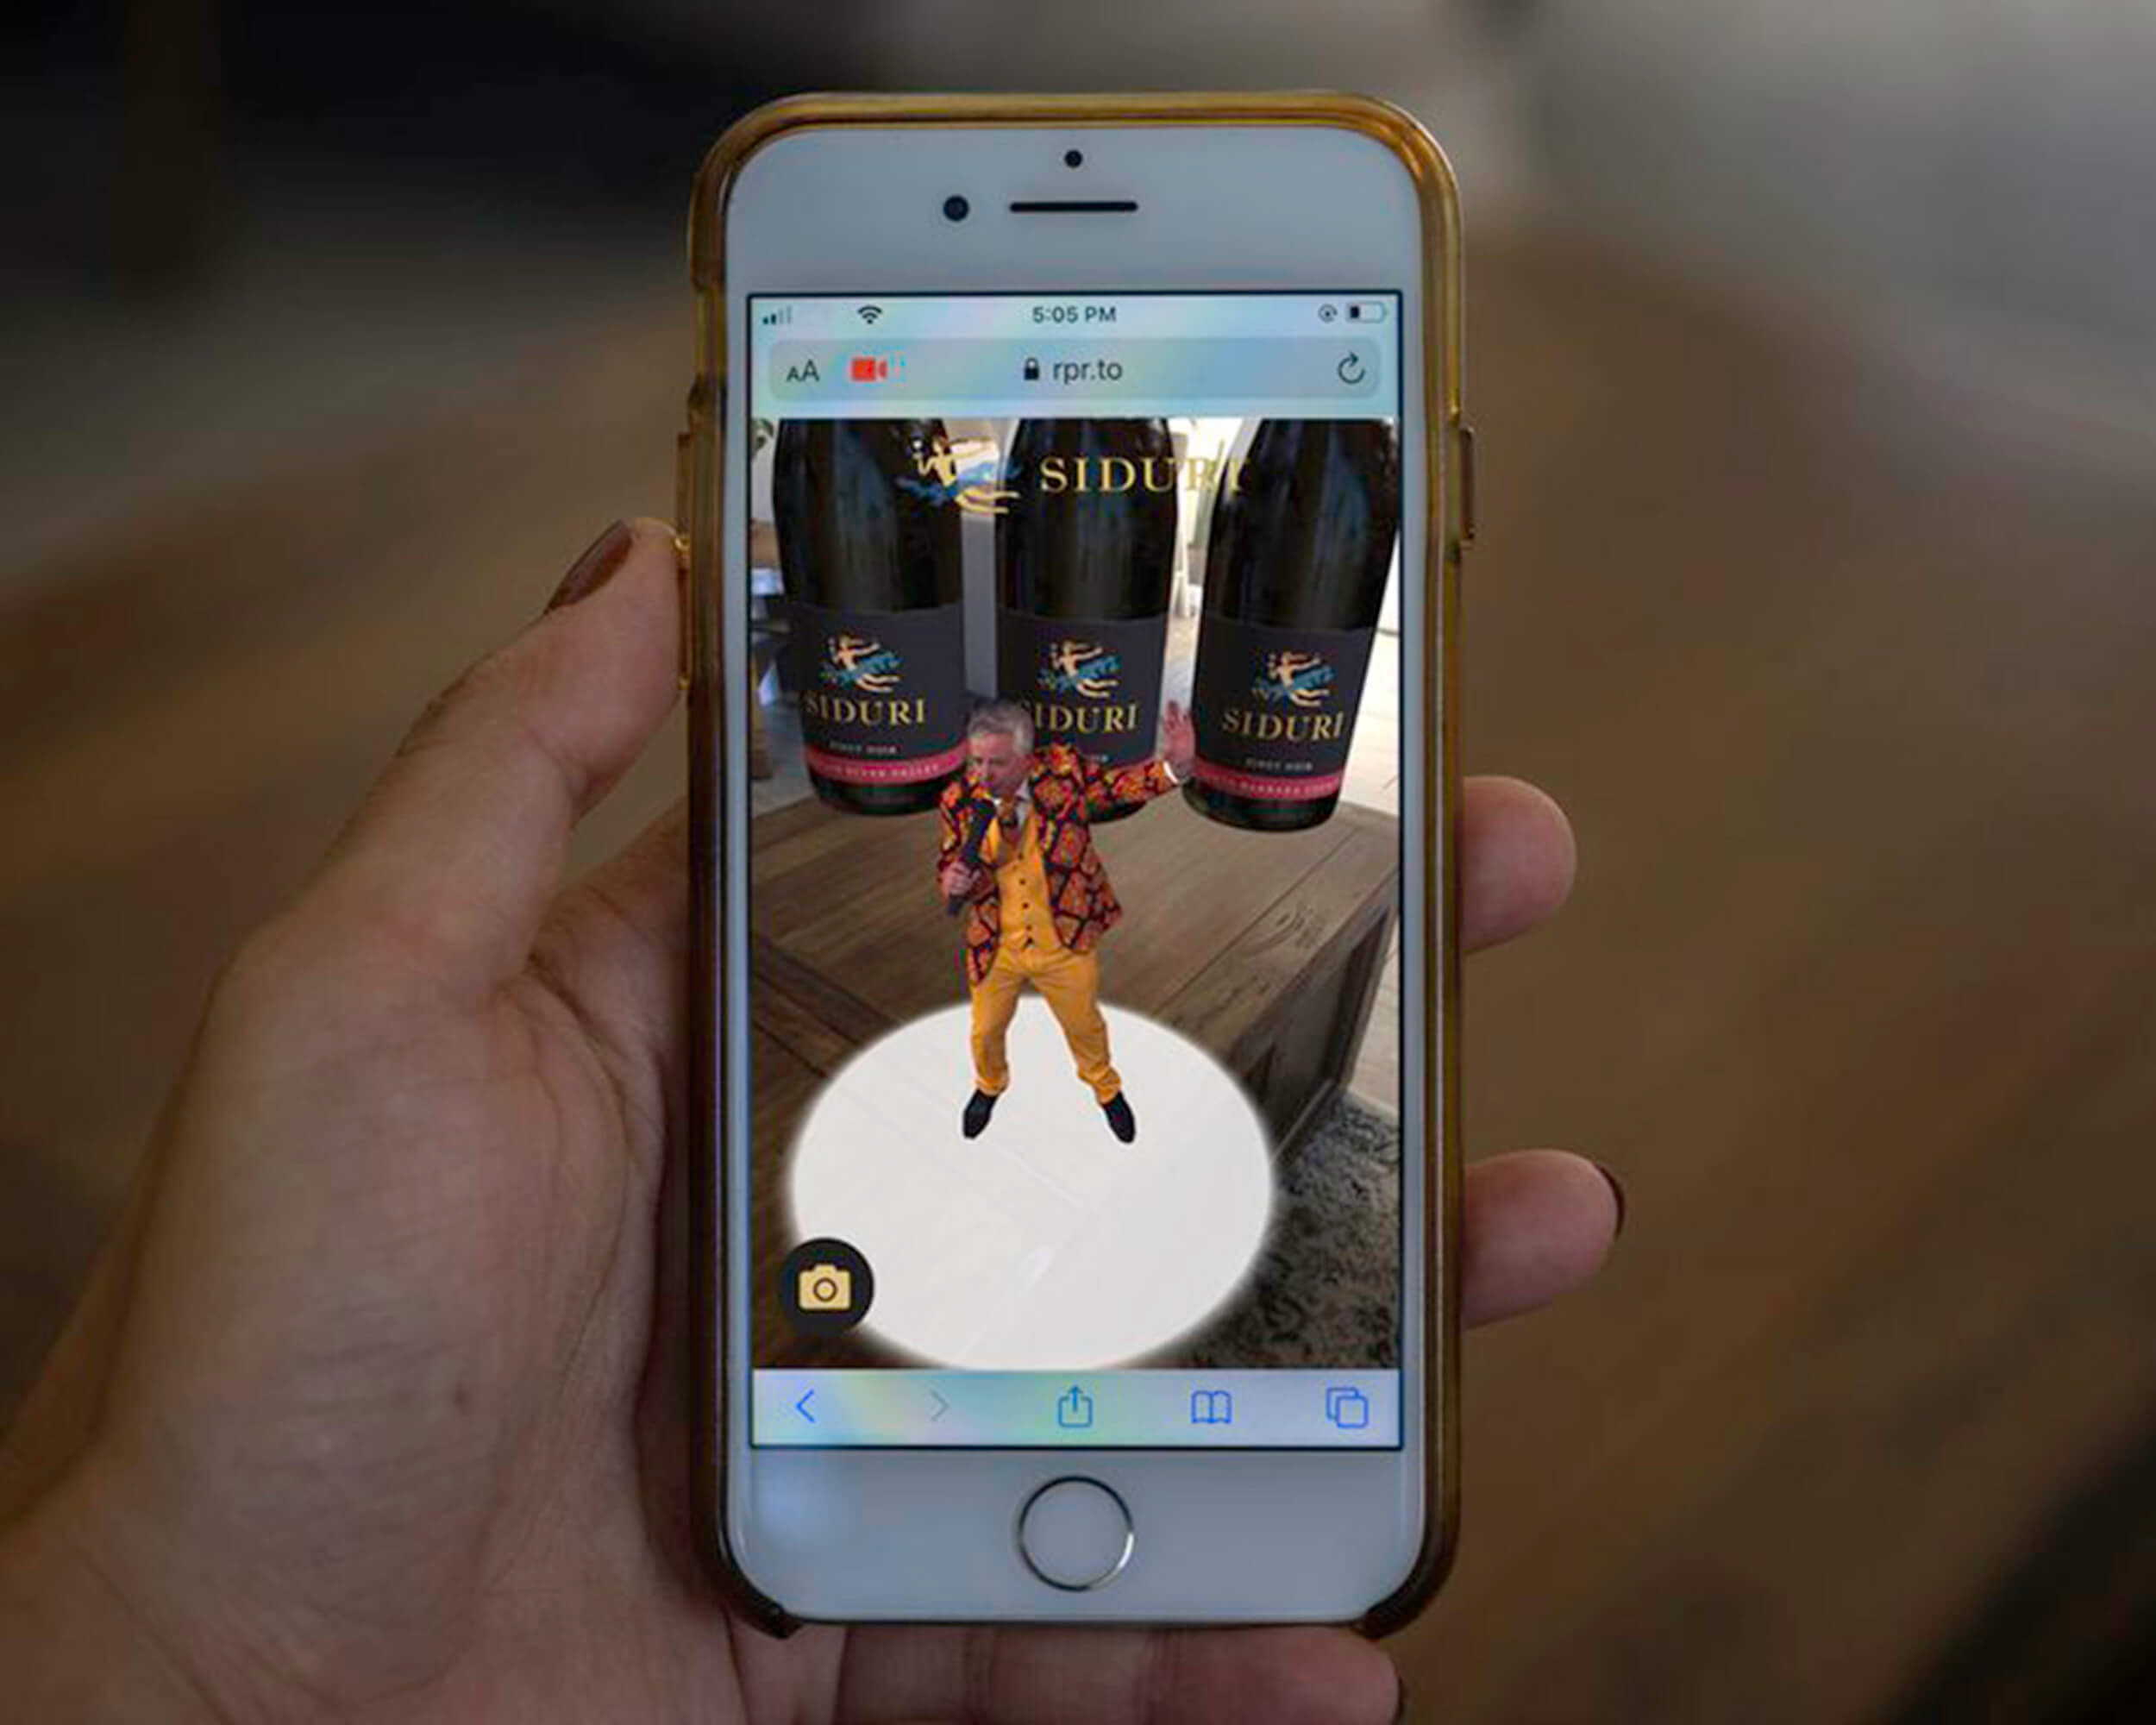 Siduri wines use holograms of their winemaker with WebAR to tell the story of their wine